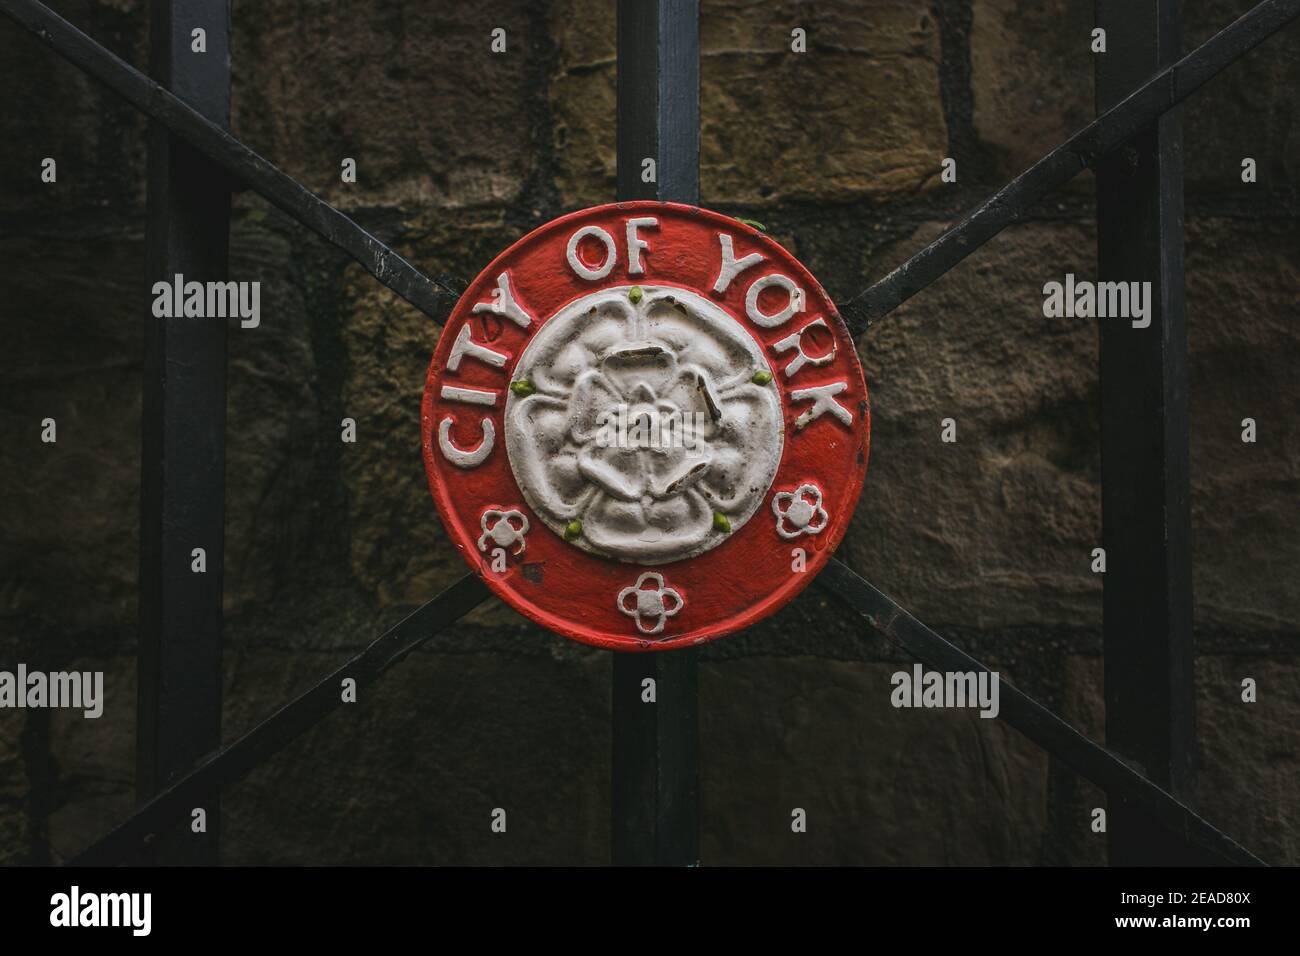 City of York Heraldic badge attached to an iron gate which gives access to York City Walls, alongside Micklegate Bar in York, Yorkshire, England, UK. Stock Photo